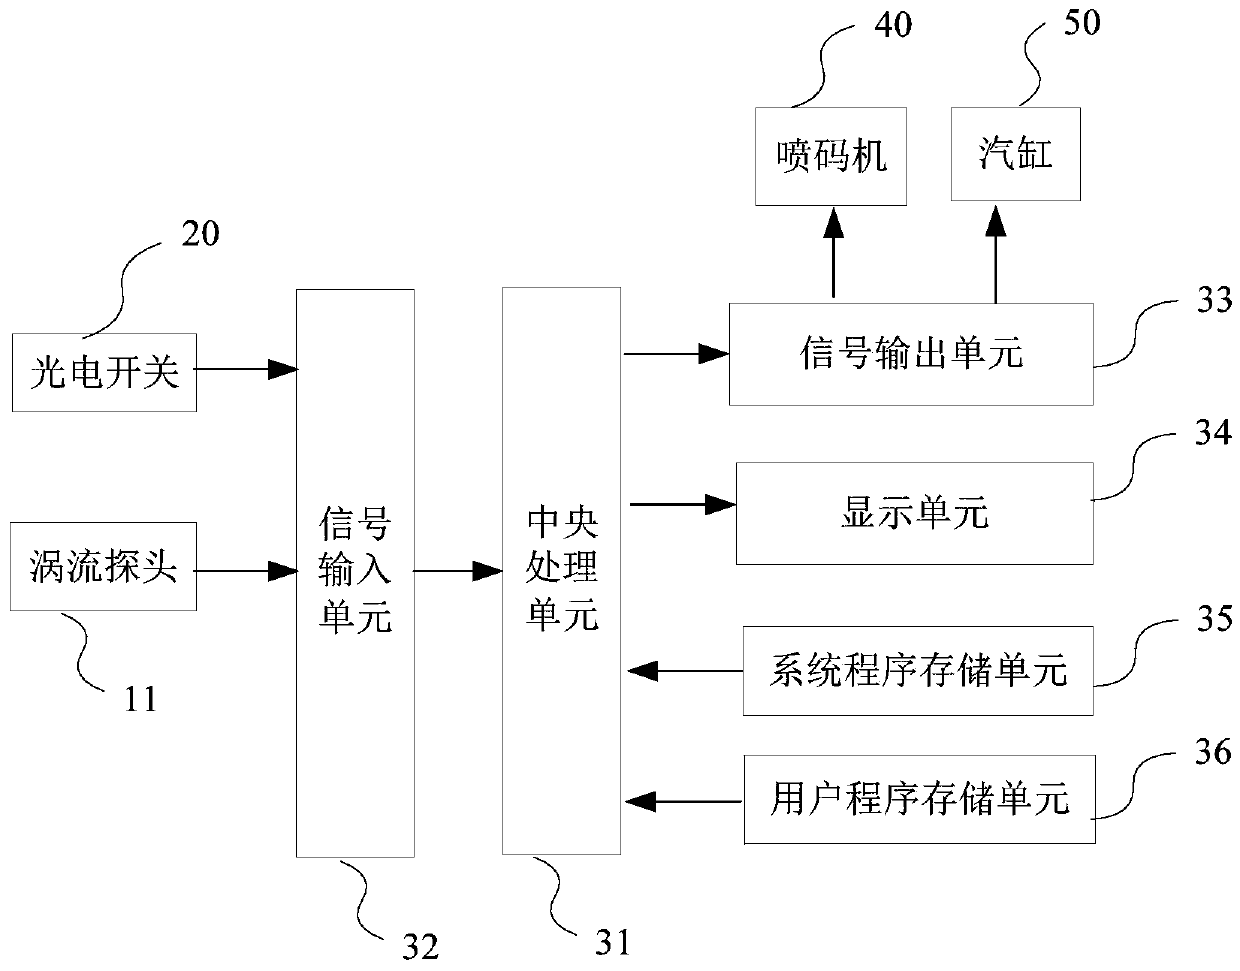 Aluminum and aluminum alloy thin-wall pipe automatic sorting method based on eddy current testing